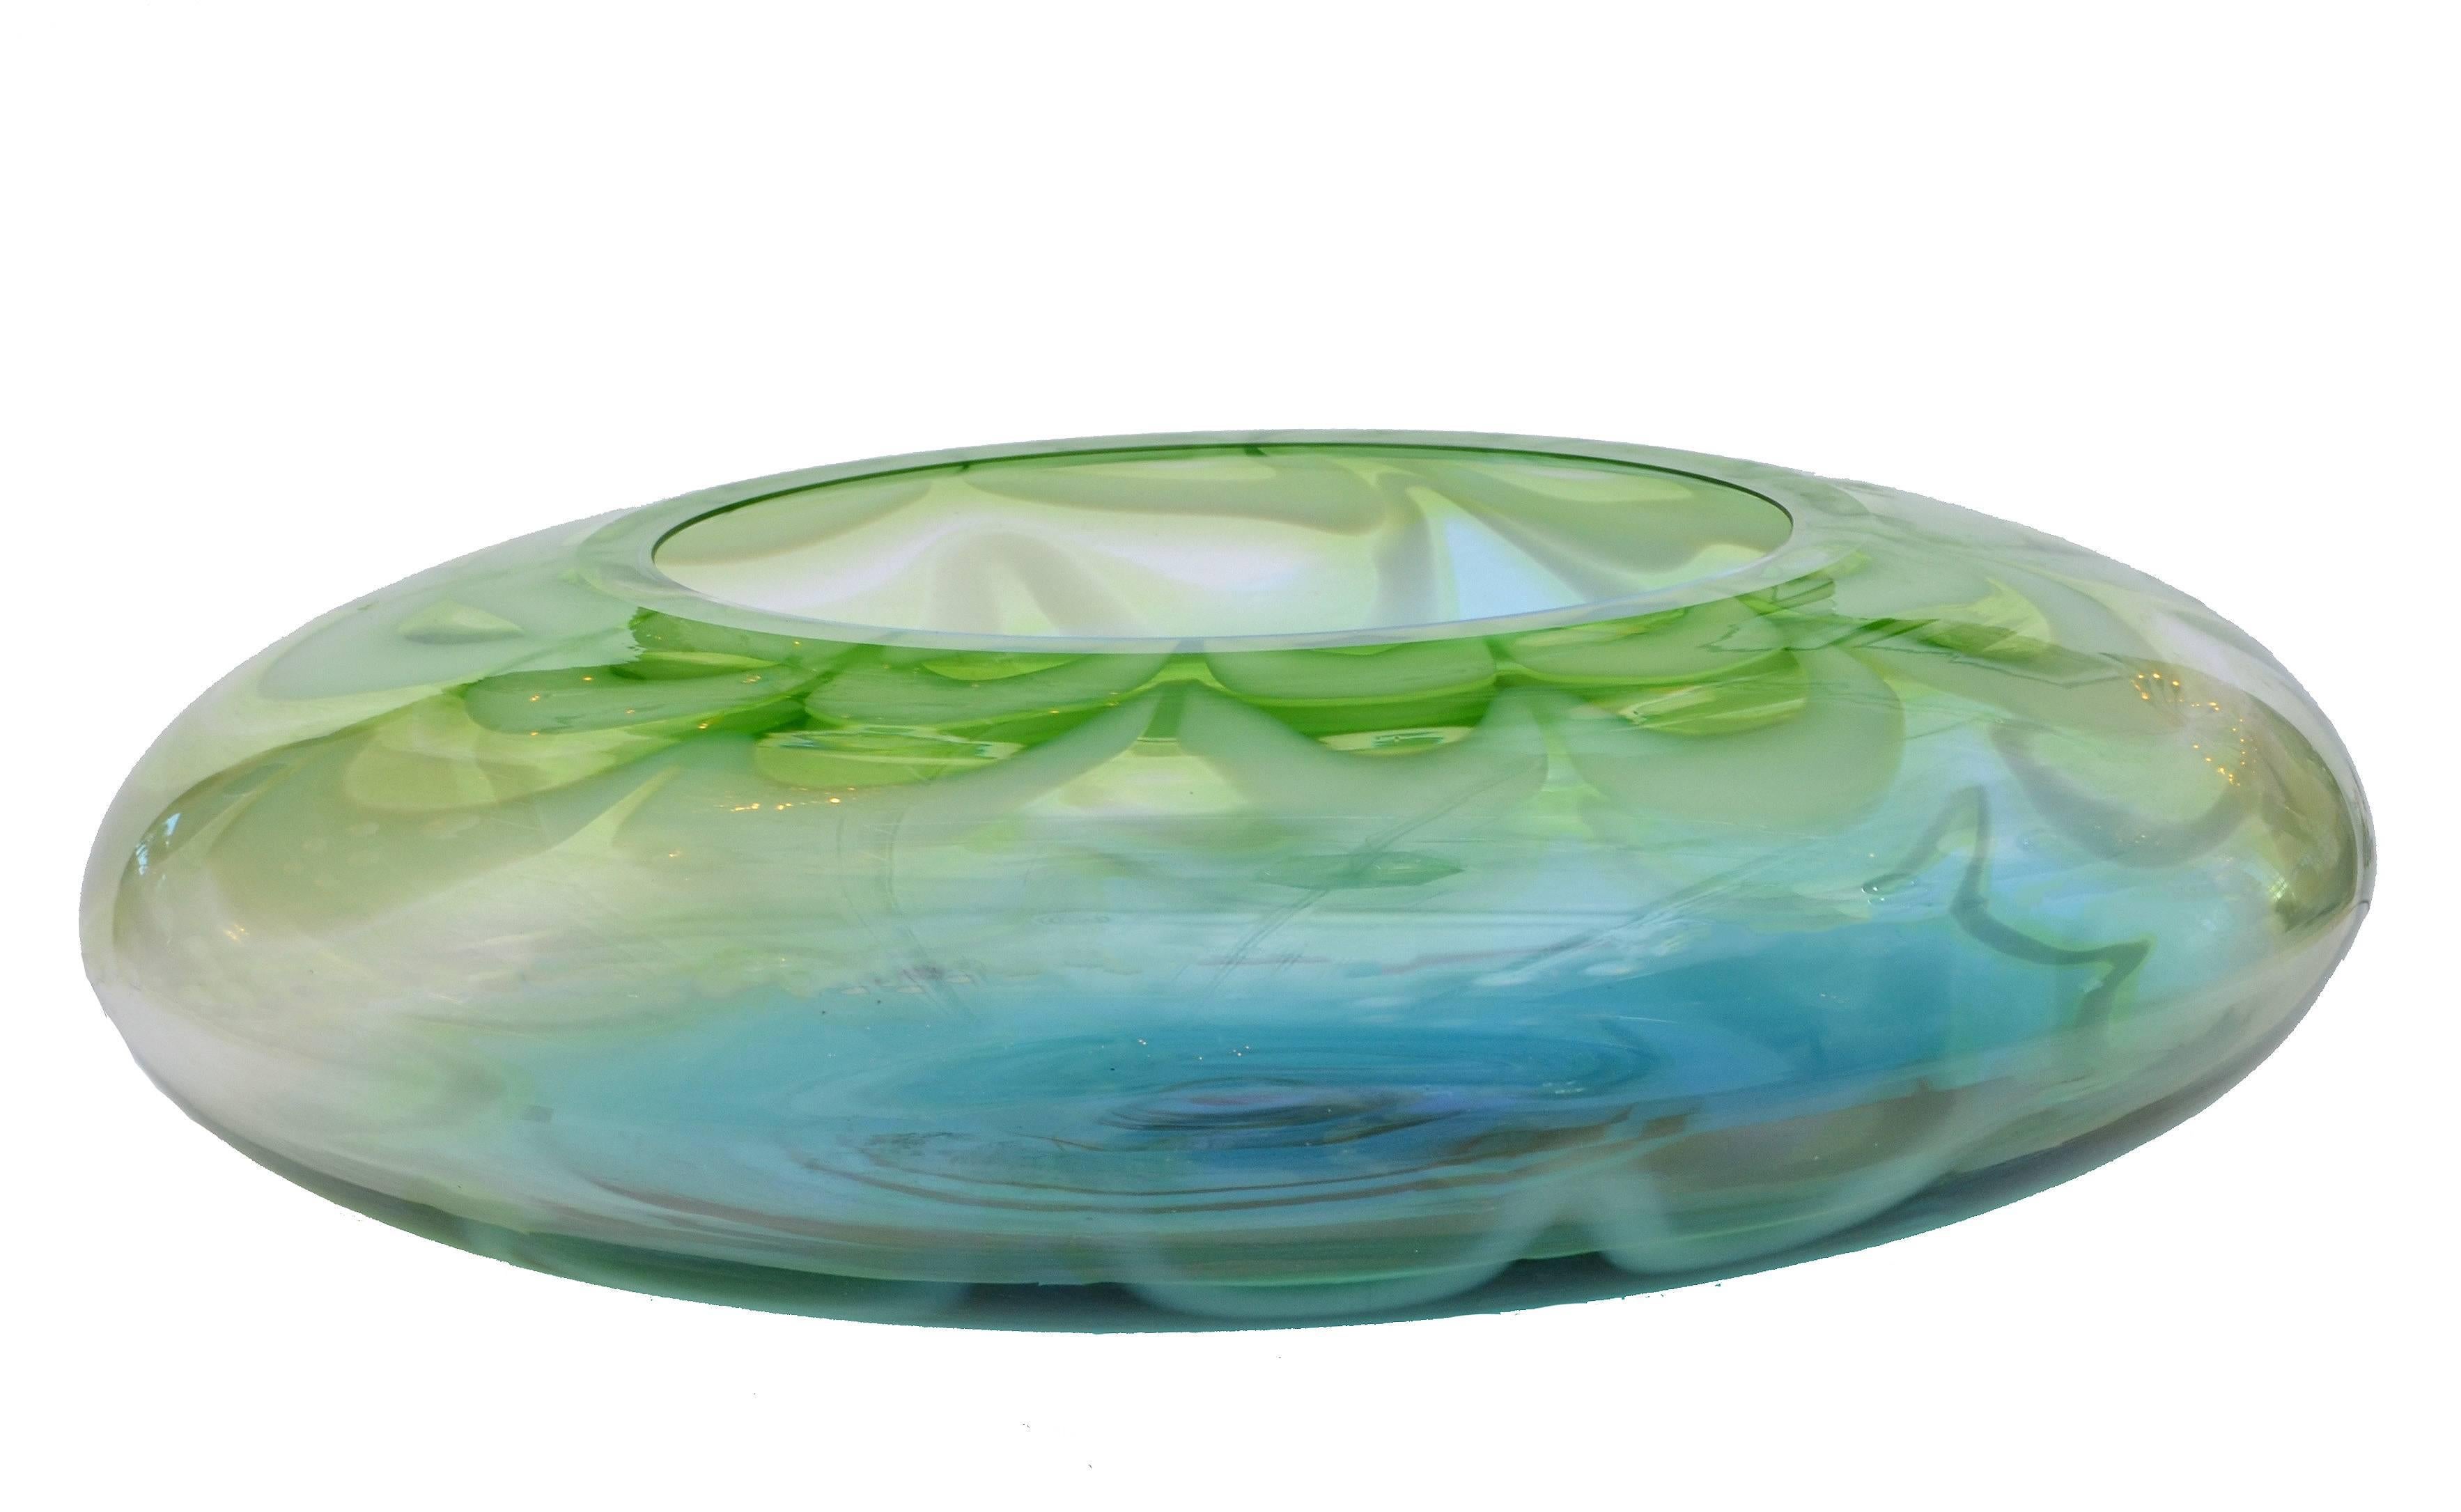 waterford glass bowls